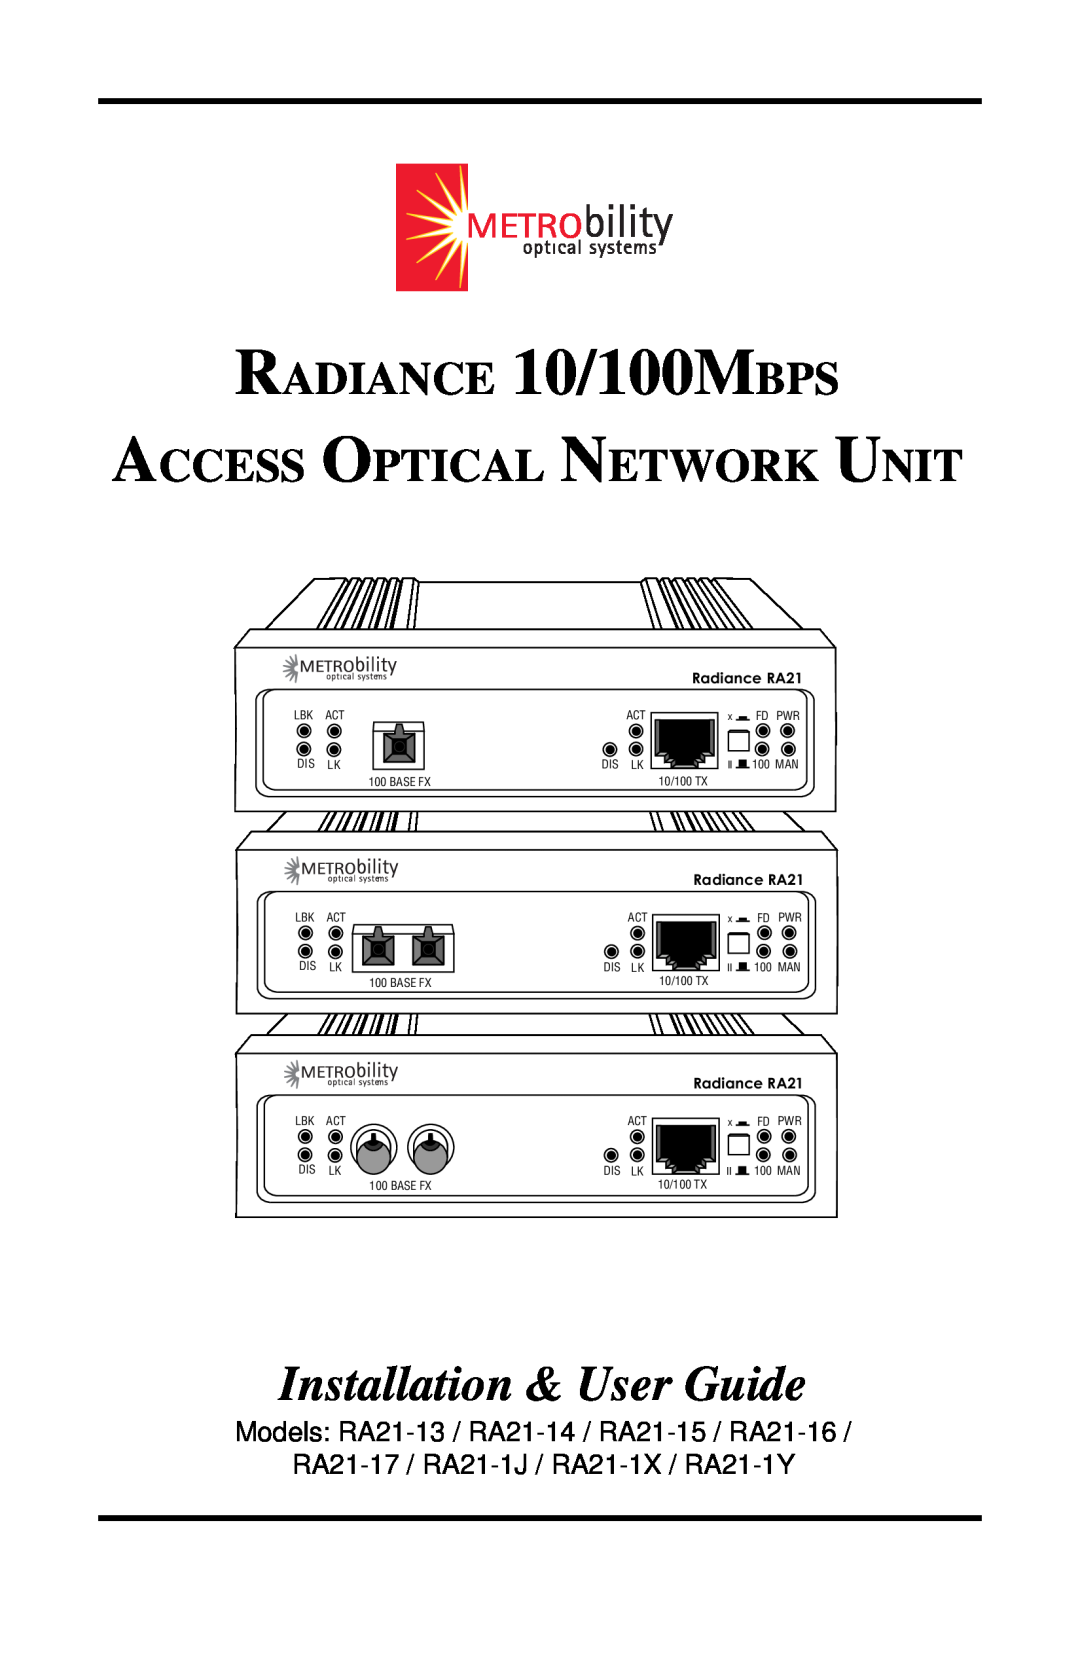 METRObility Optical Systems RADIANCE 10/100MBPS ACCESS OPTICAL NETWORK UNIT manual Installation & User Guide 